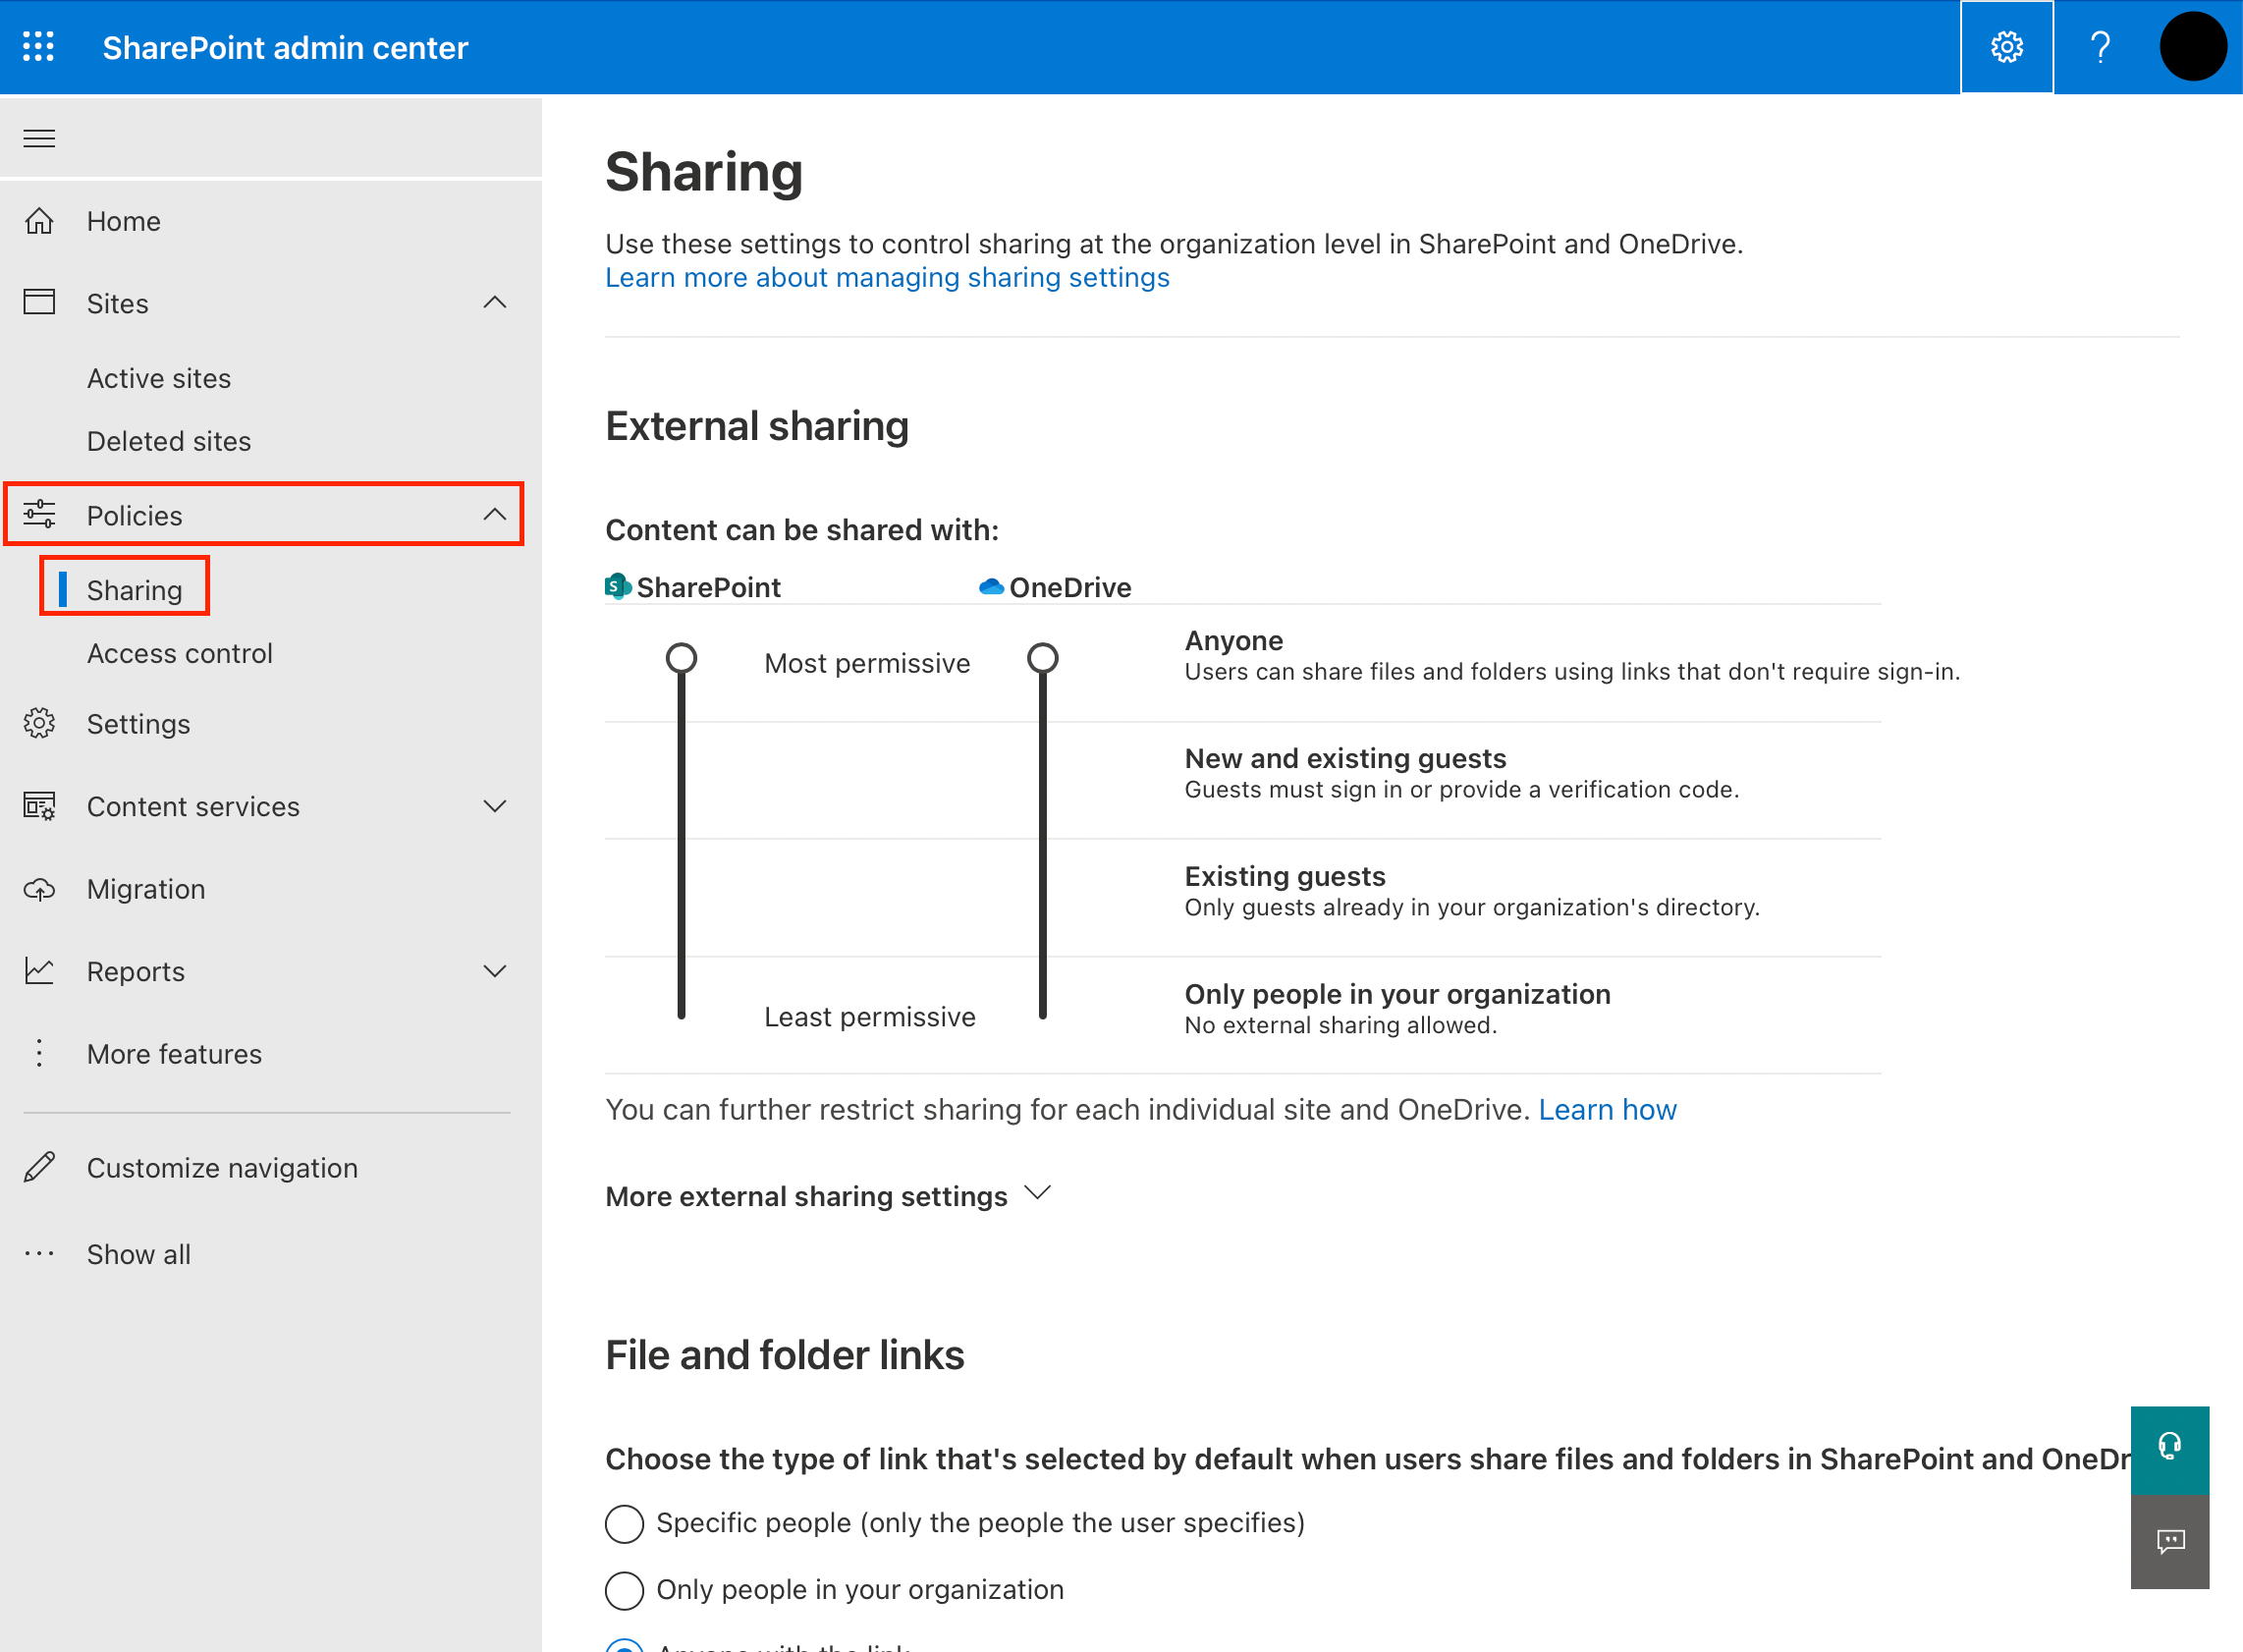 How to manage settings for yoru sharepoint site or site collection